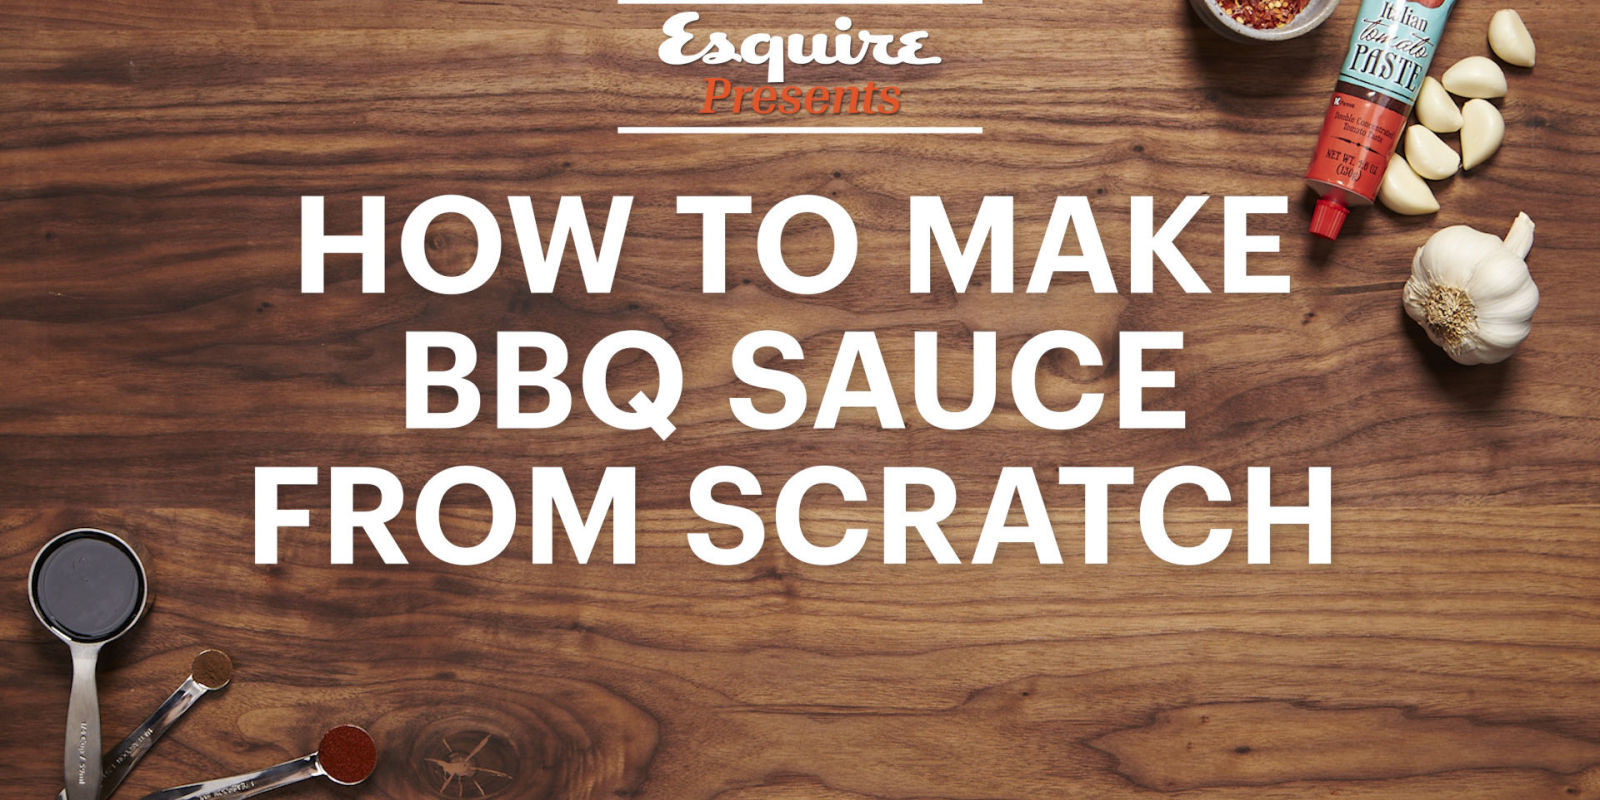 How To Make Bbq Sauce From Scratch
 Make BBQ Sauce from Scratch How to Make Barbecue Sauce